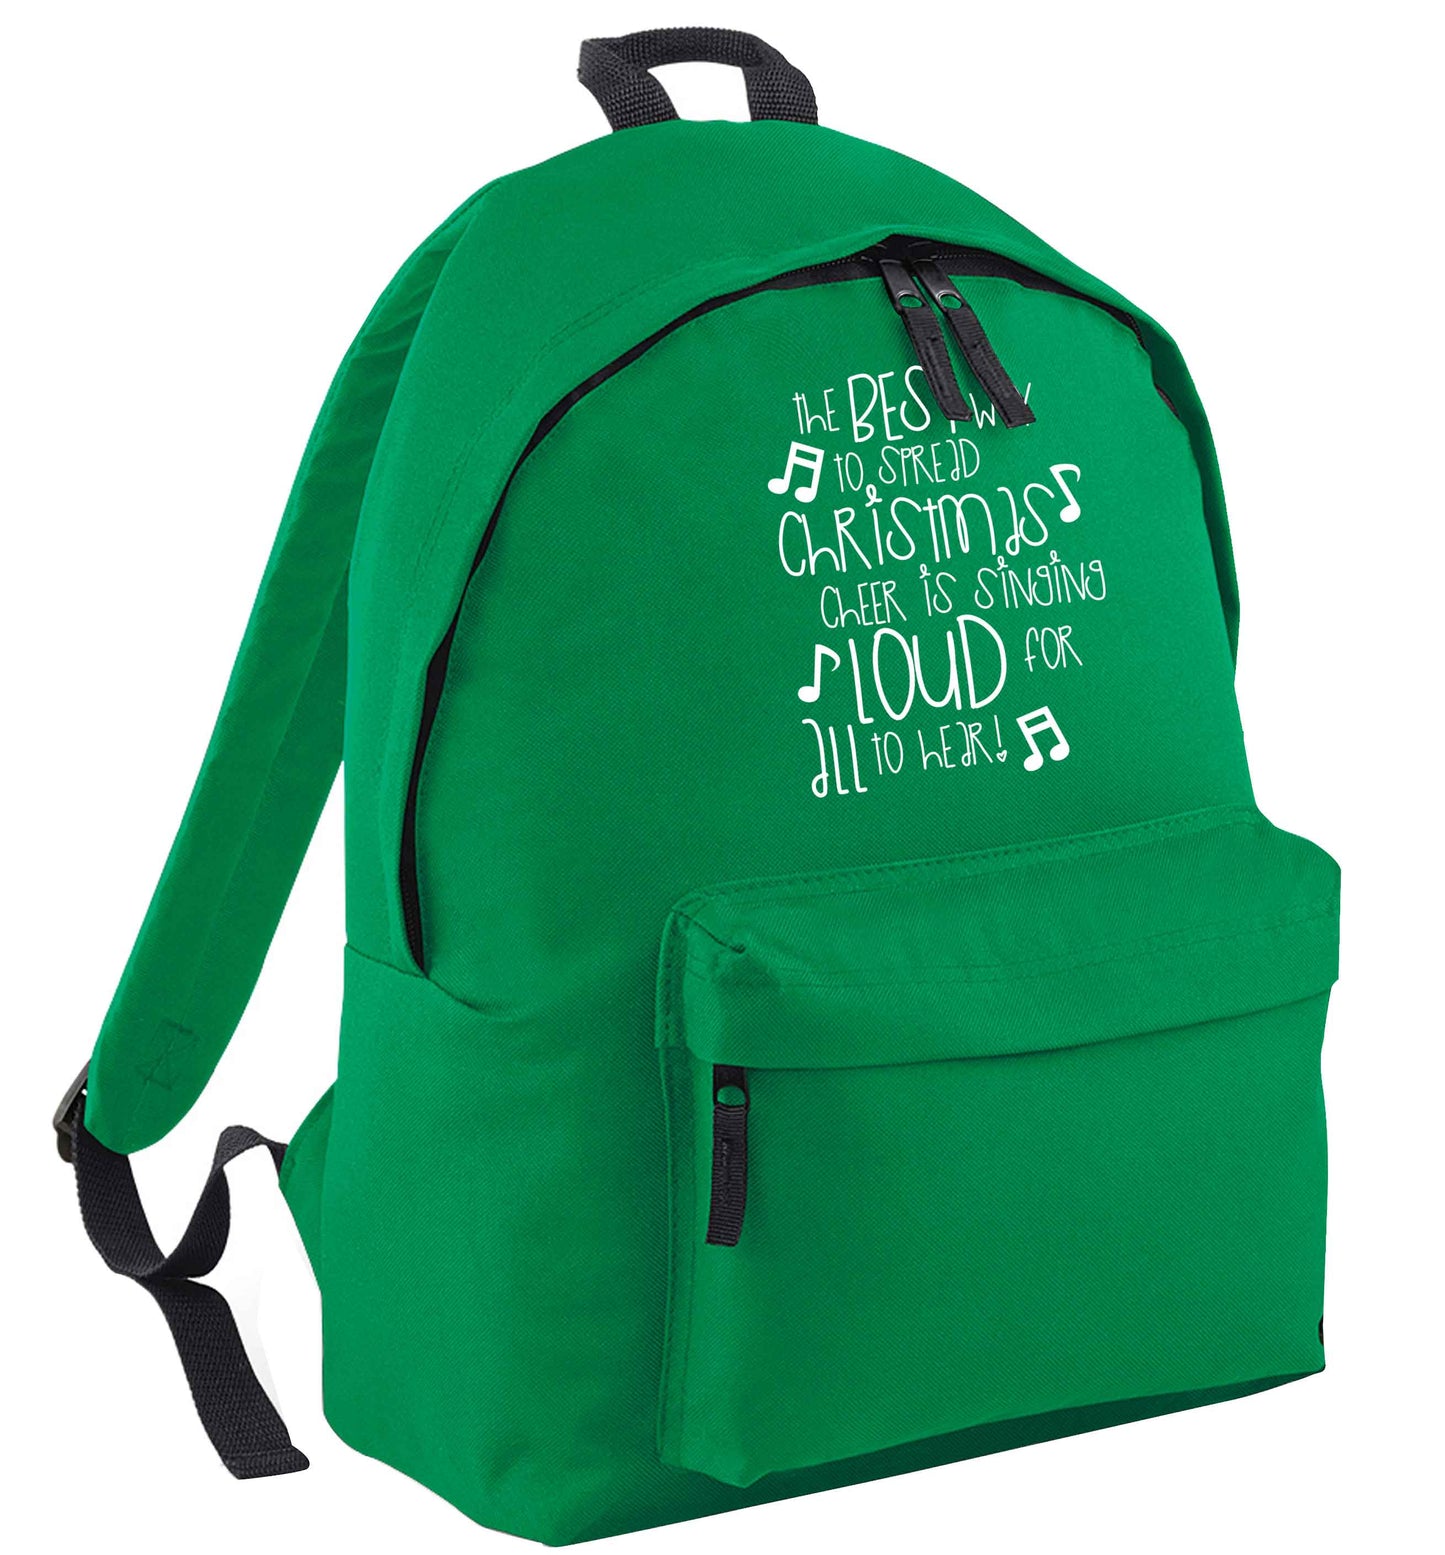 The best way to spread Christmas cheer is singing loud for all to hear green adults backpack